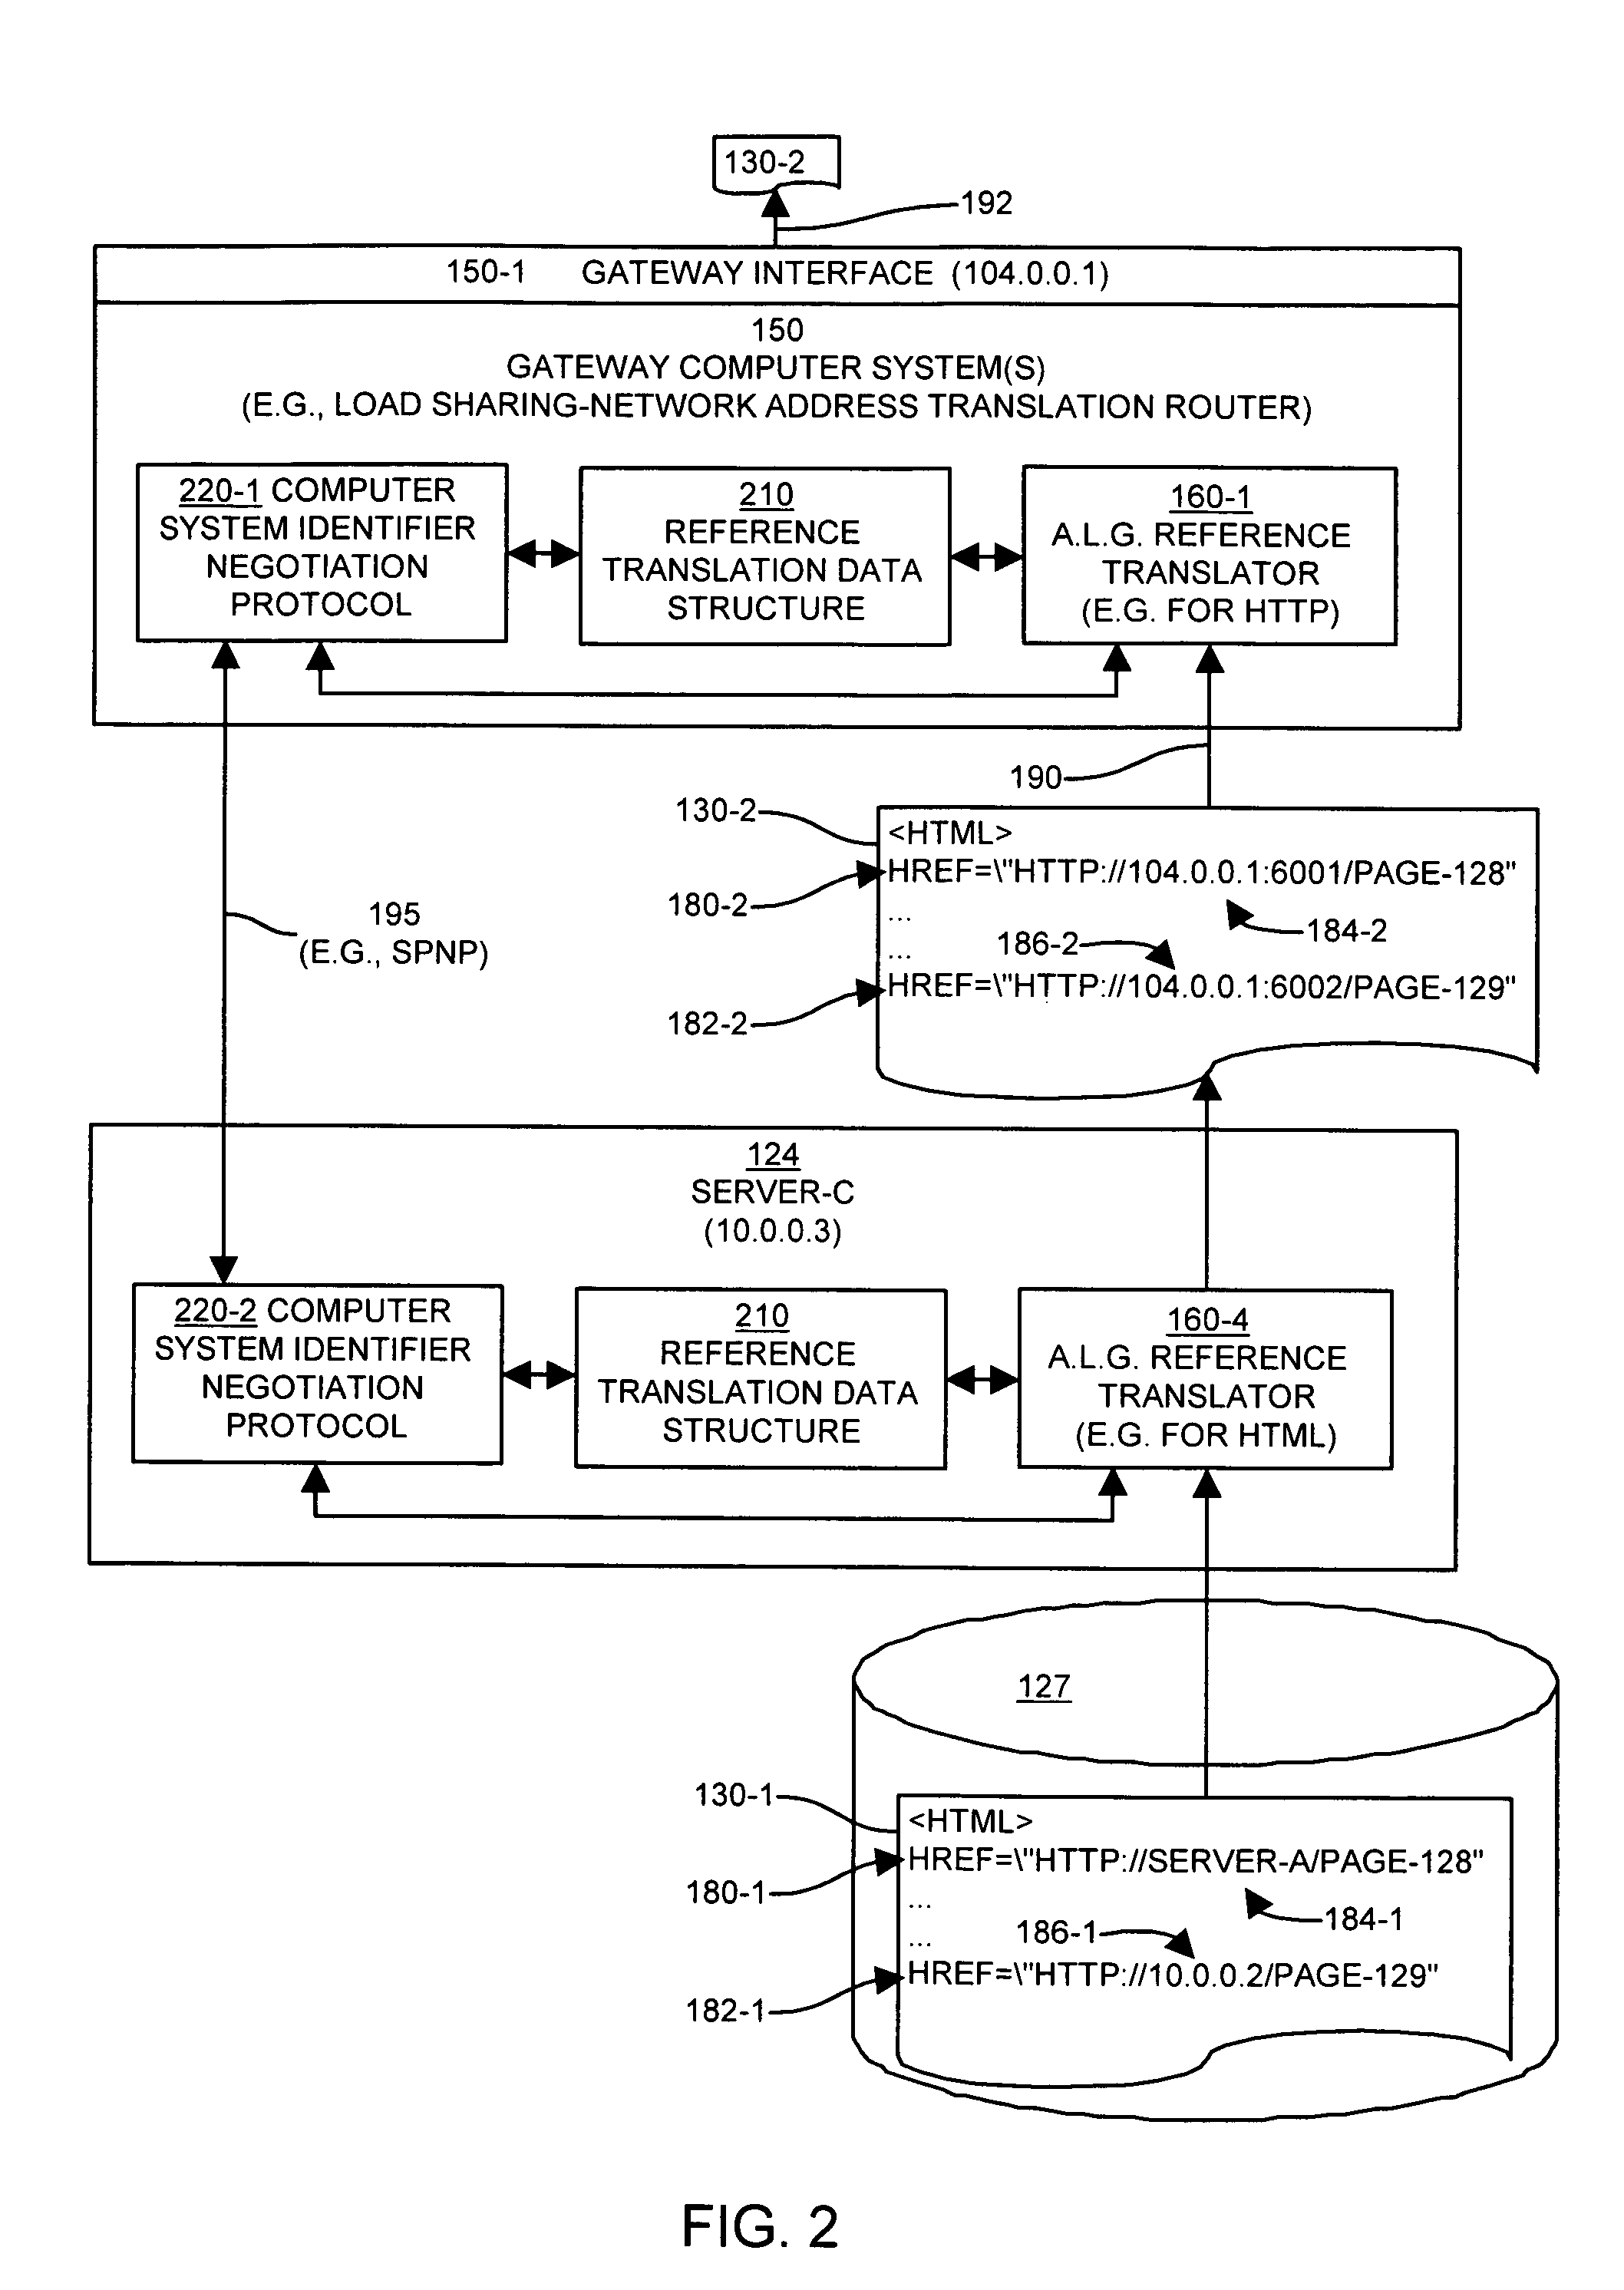 Apparatus and methods for providing an application level gateway for use in networks